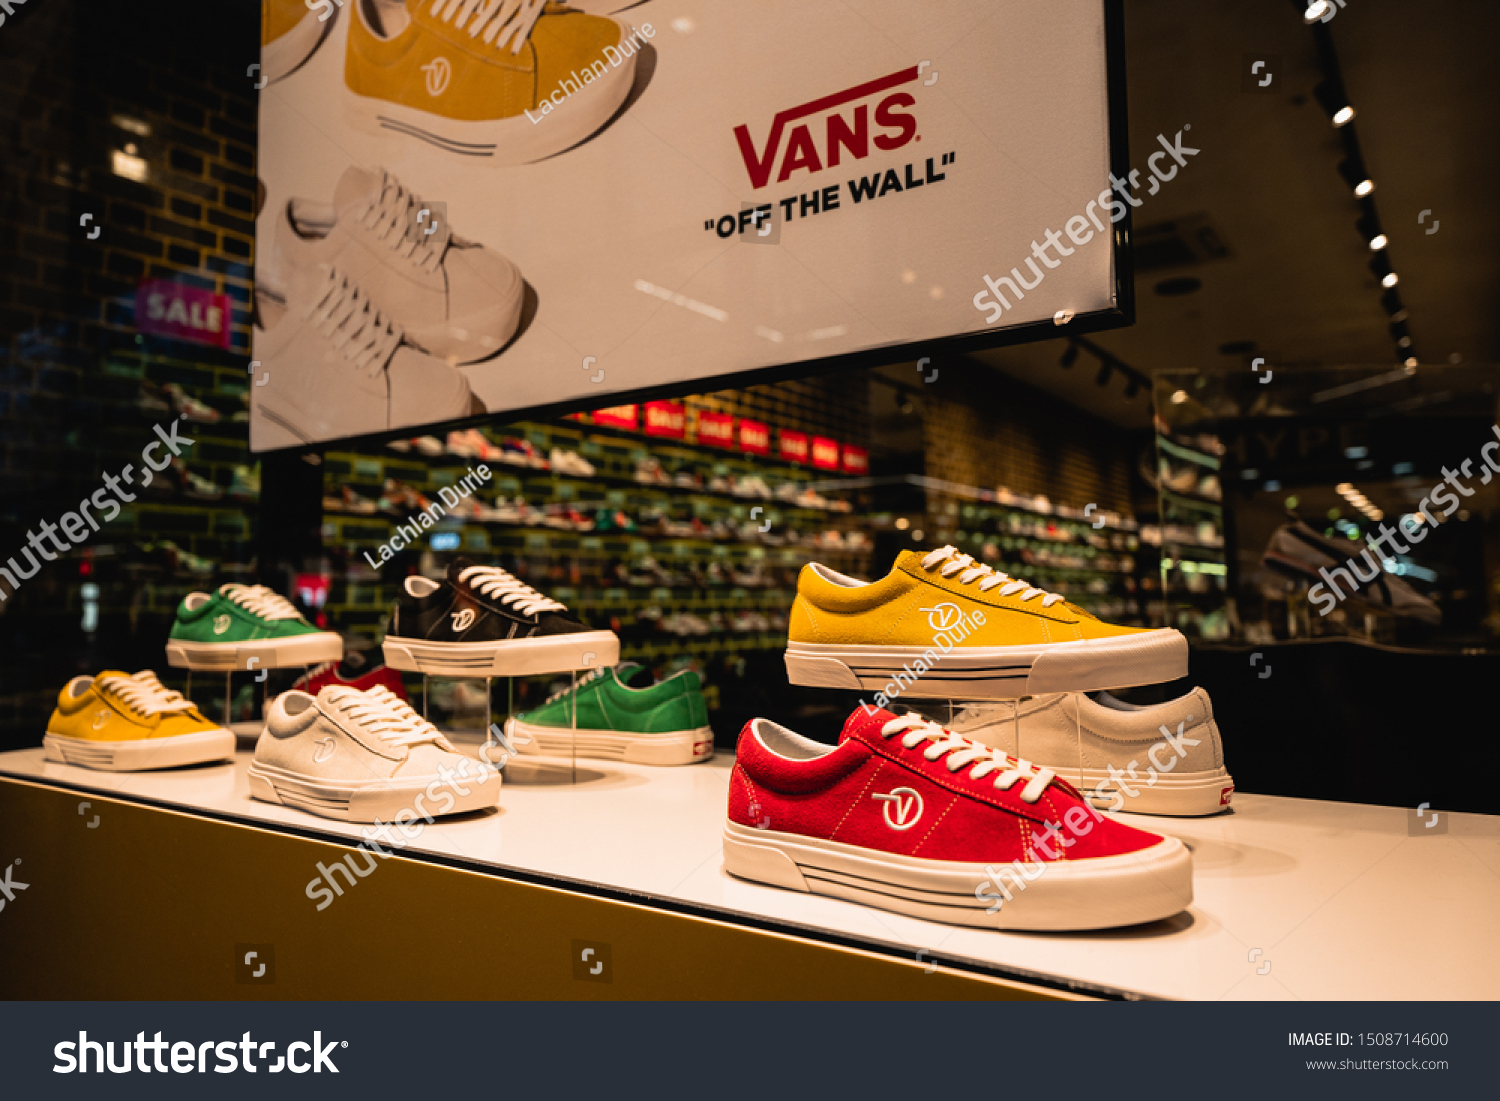 vans off the wall 2019